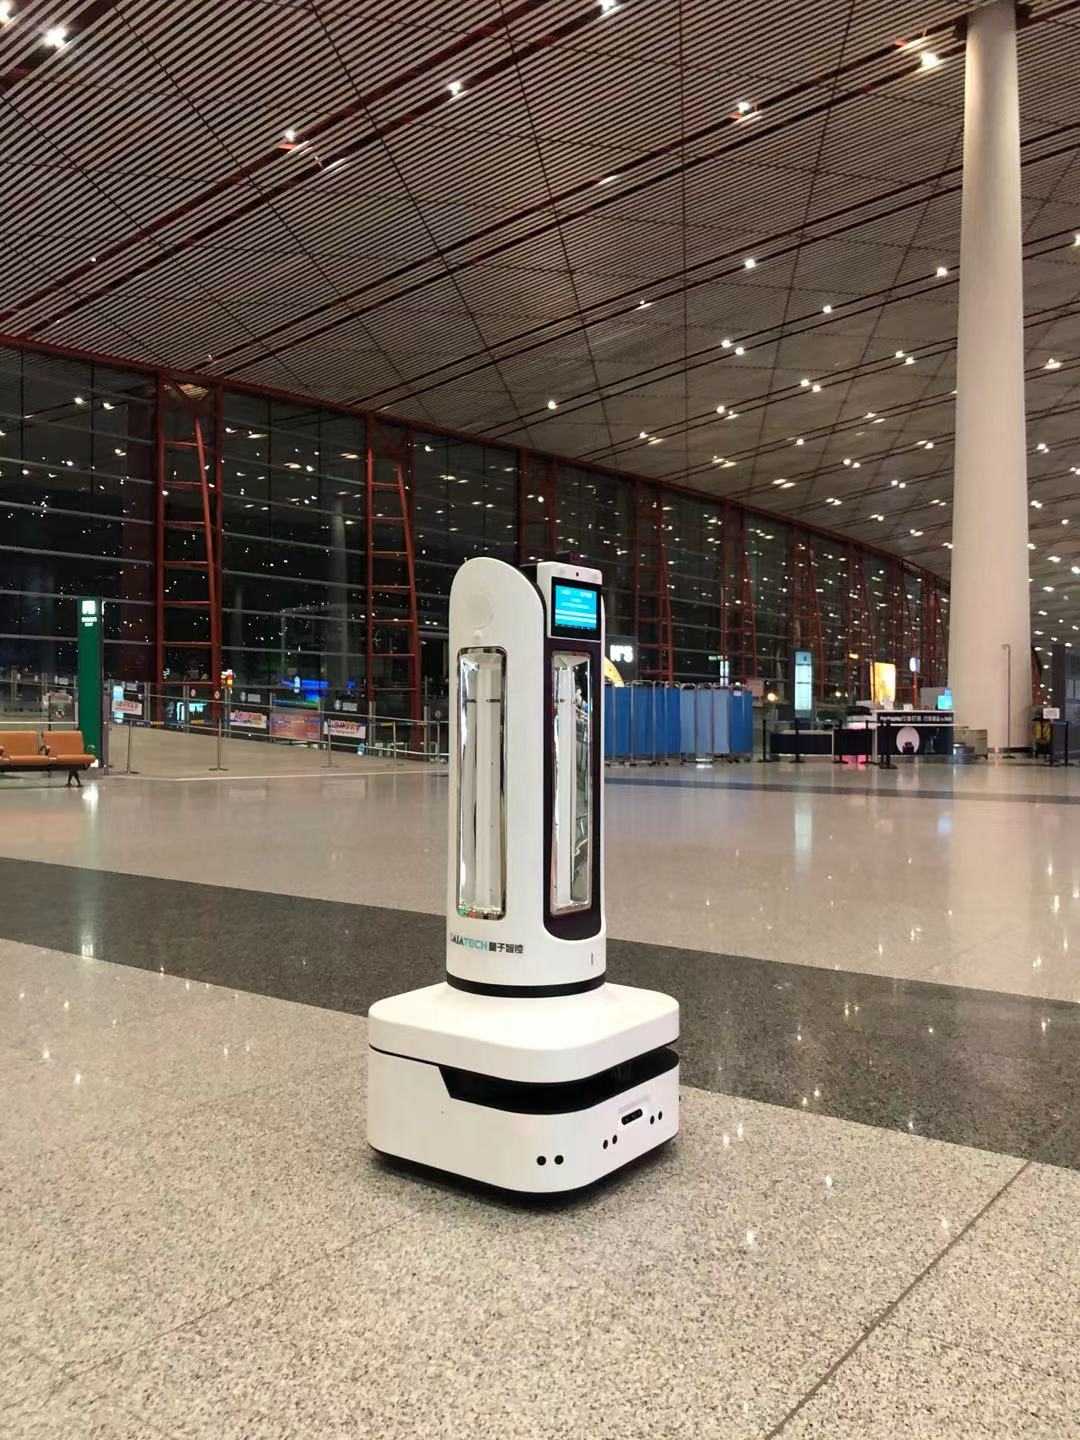 The UVC disinfection robot works in the Terminal 3 of Beijing Capital International Airport